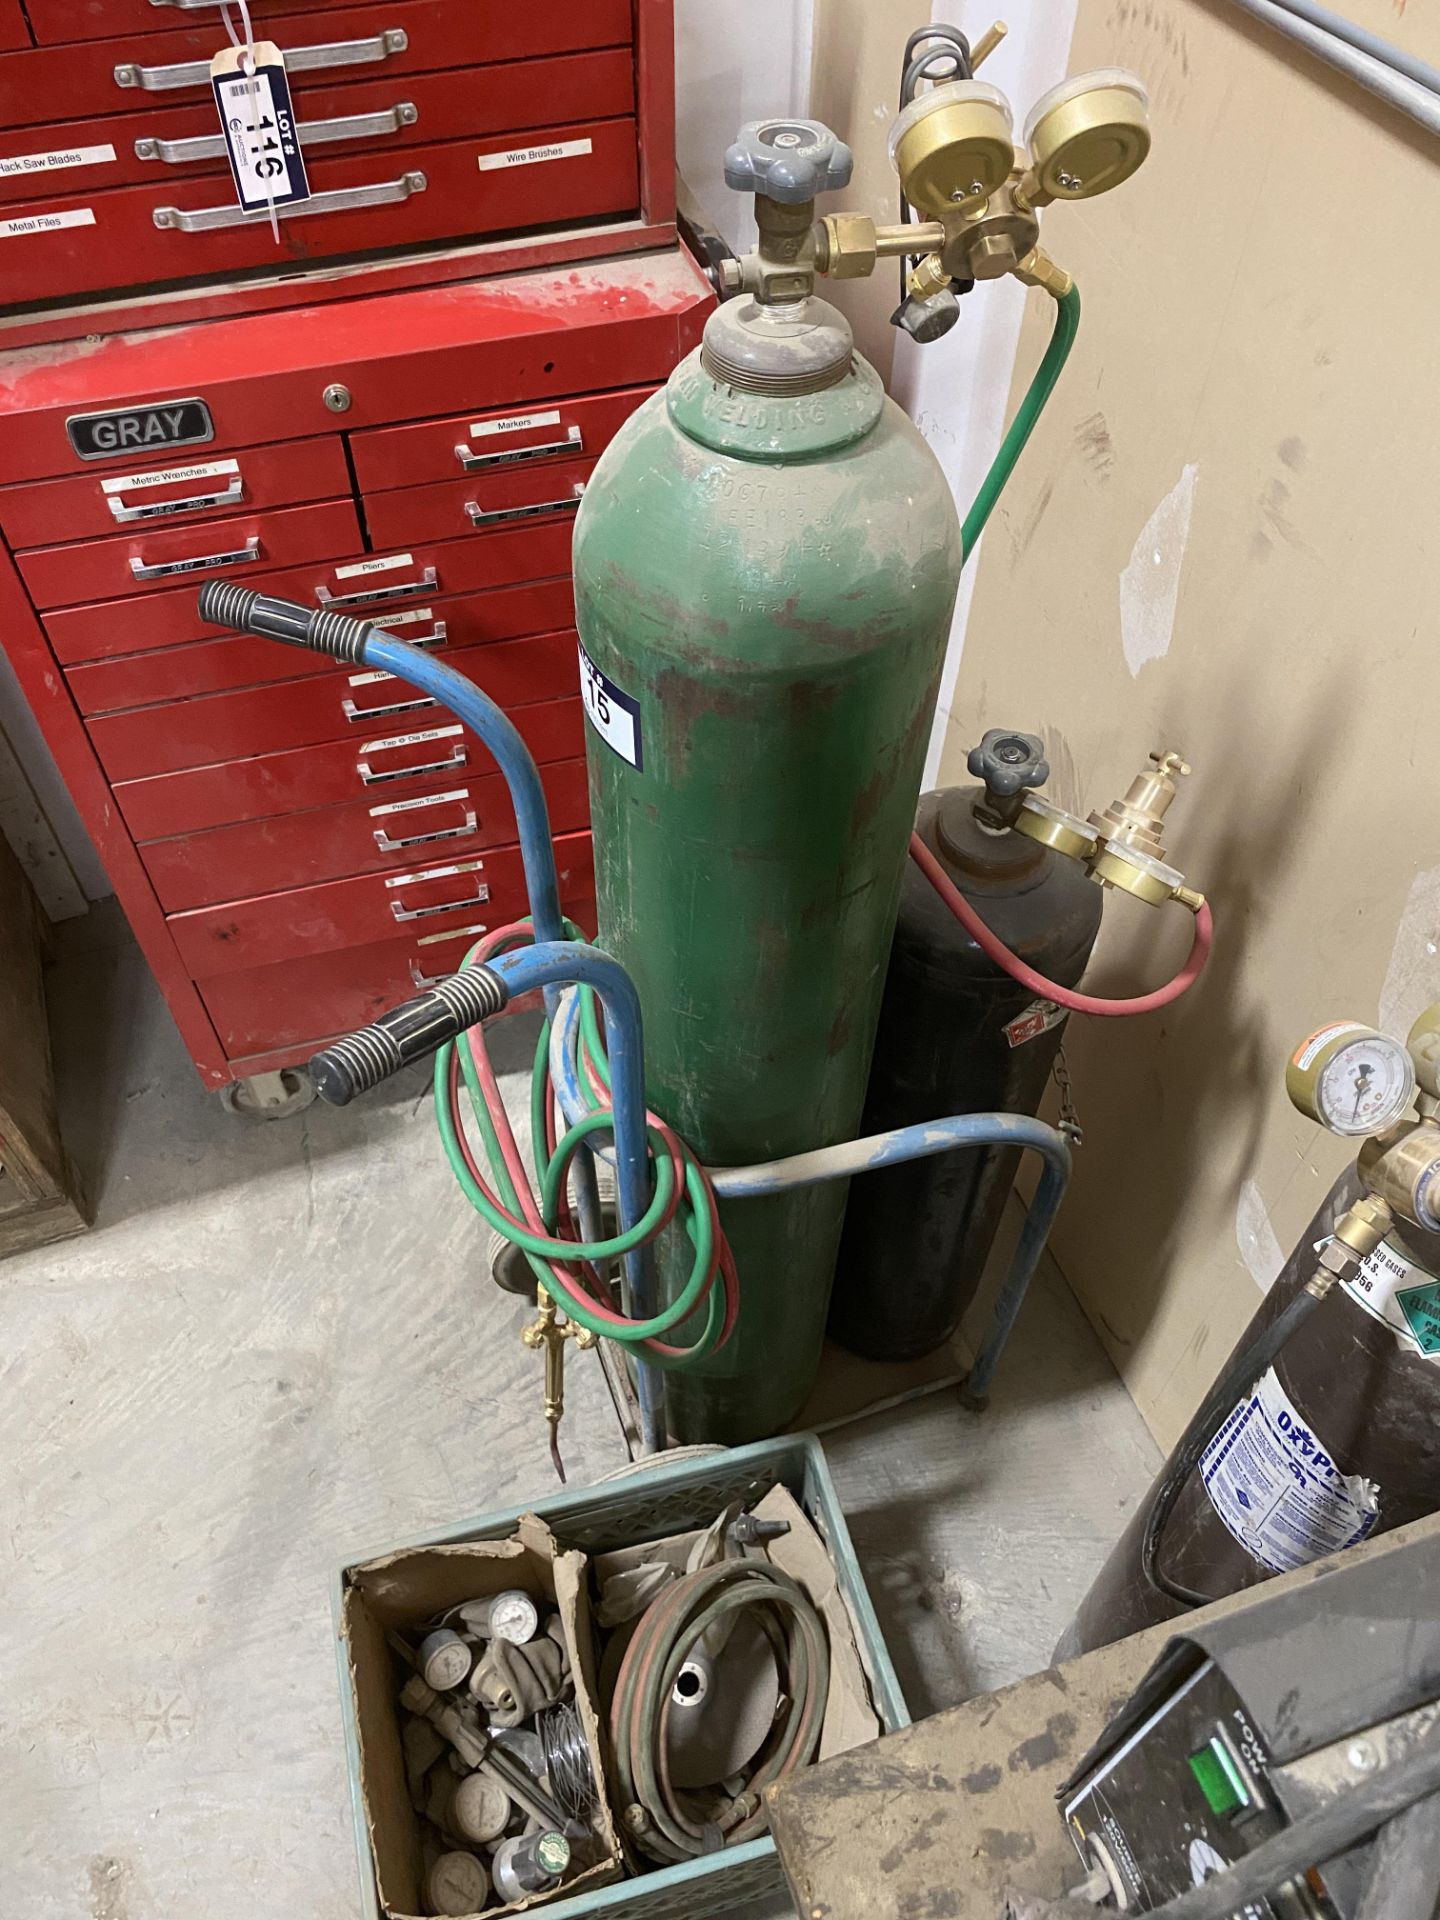 Lot of Oxy/Acetylene Cart w/ Gauges, Torches, Hoses, Bottles, etc. - Image 3 of 5